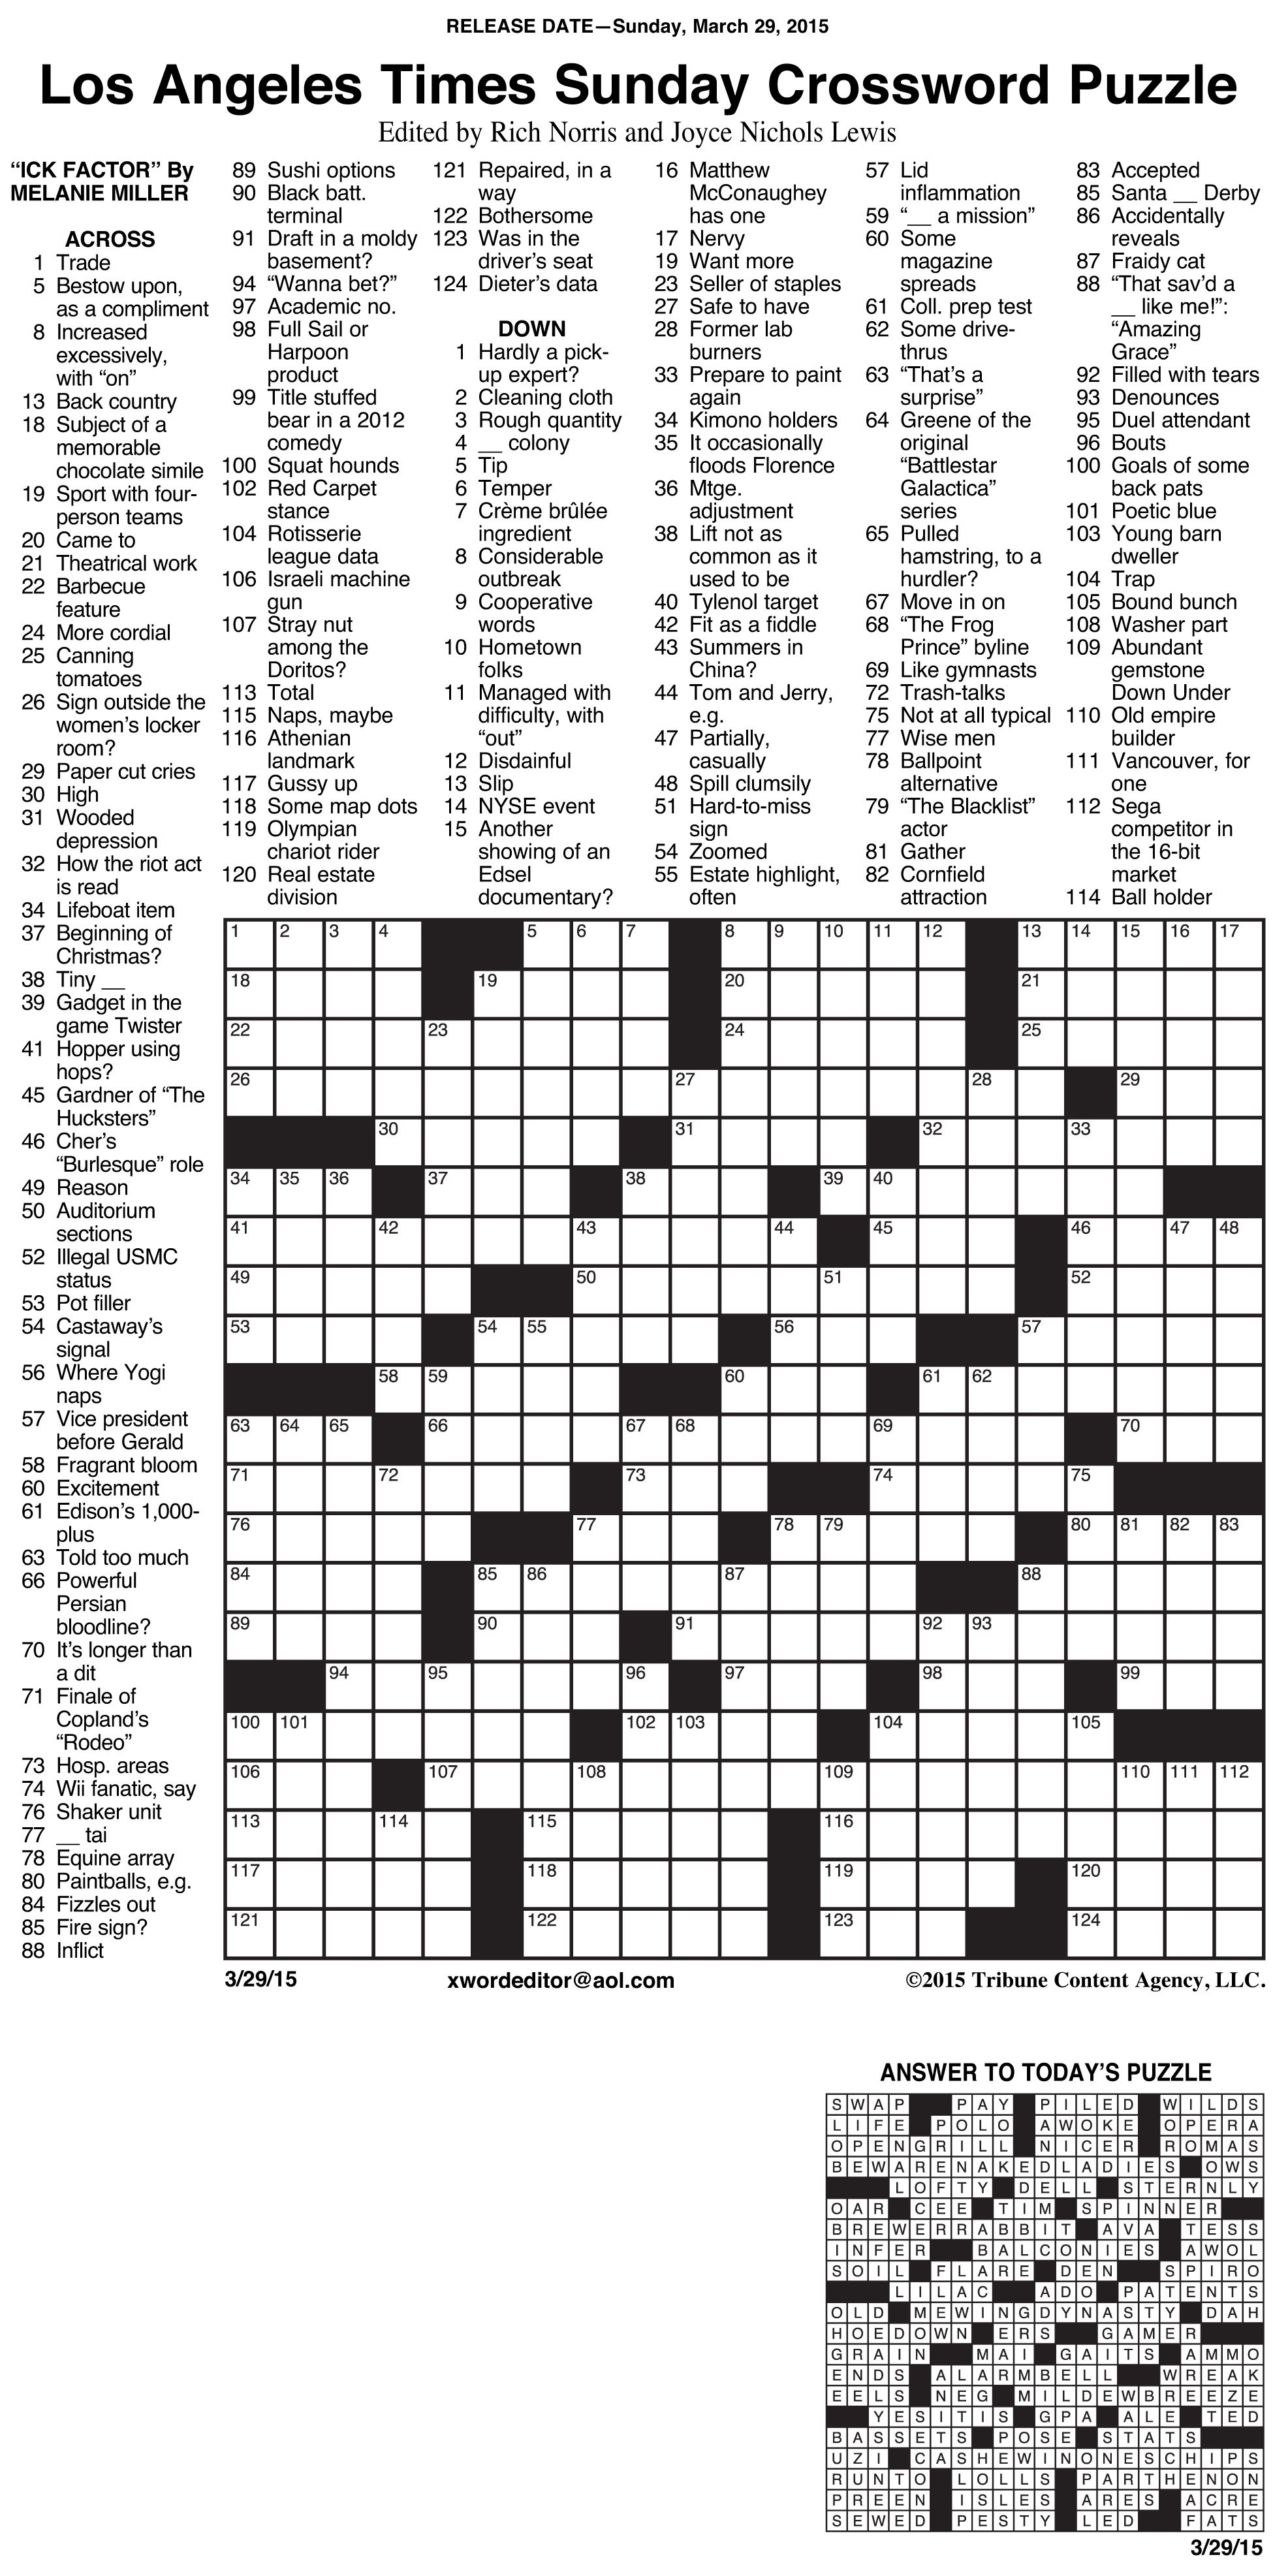 Images: Nyt Free Printable Crossword Puzzles, - Best Games Resource - Printable Crossword Puzzles La Times